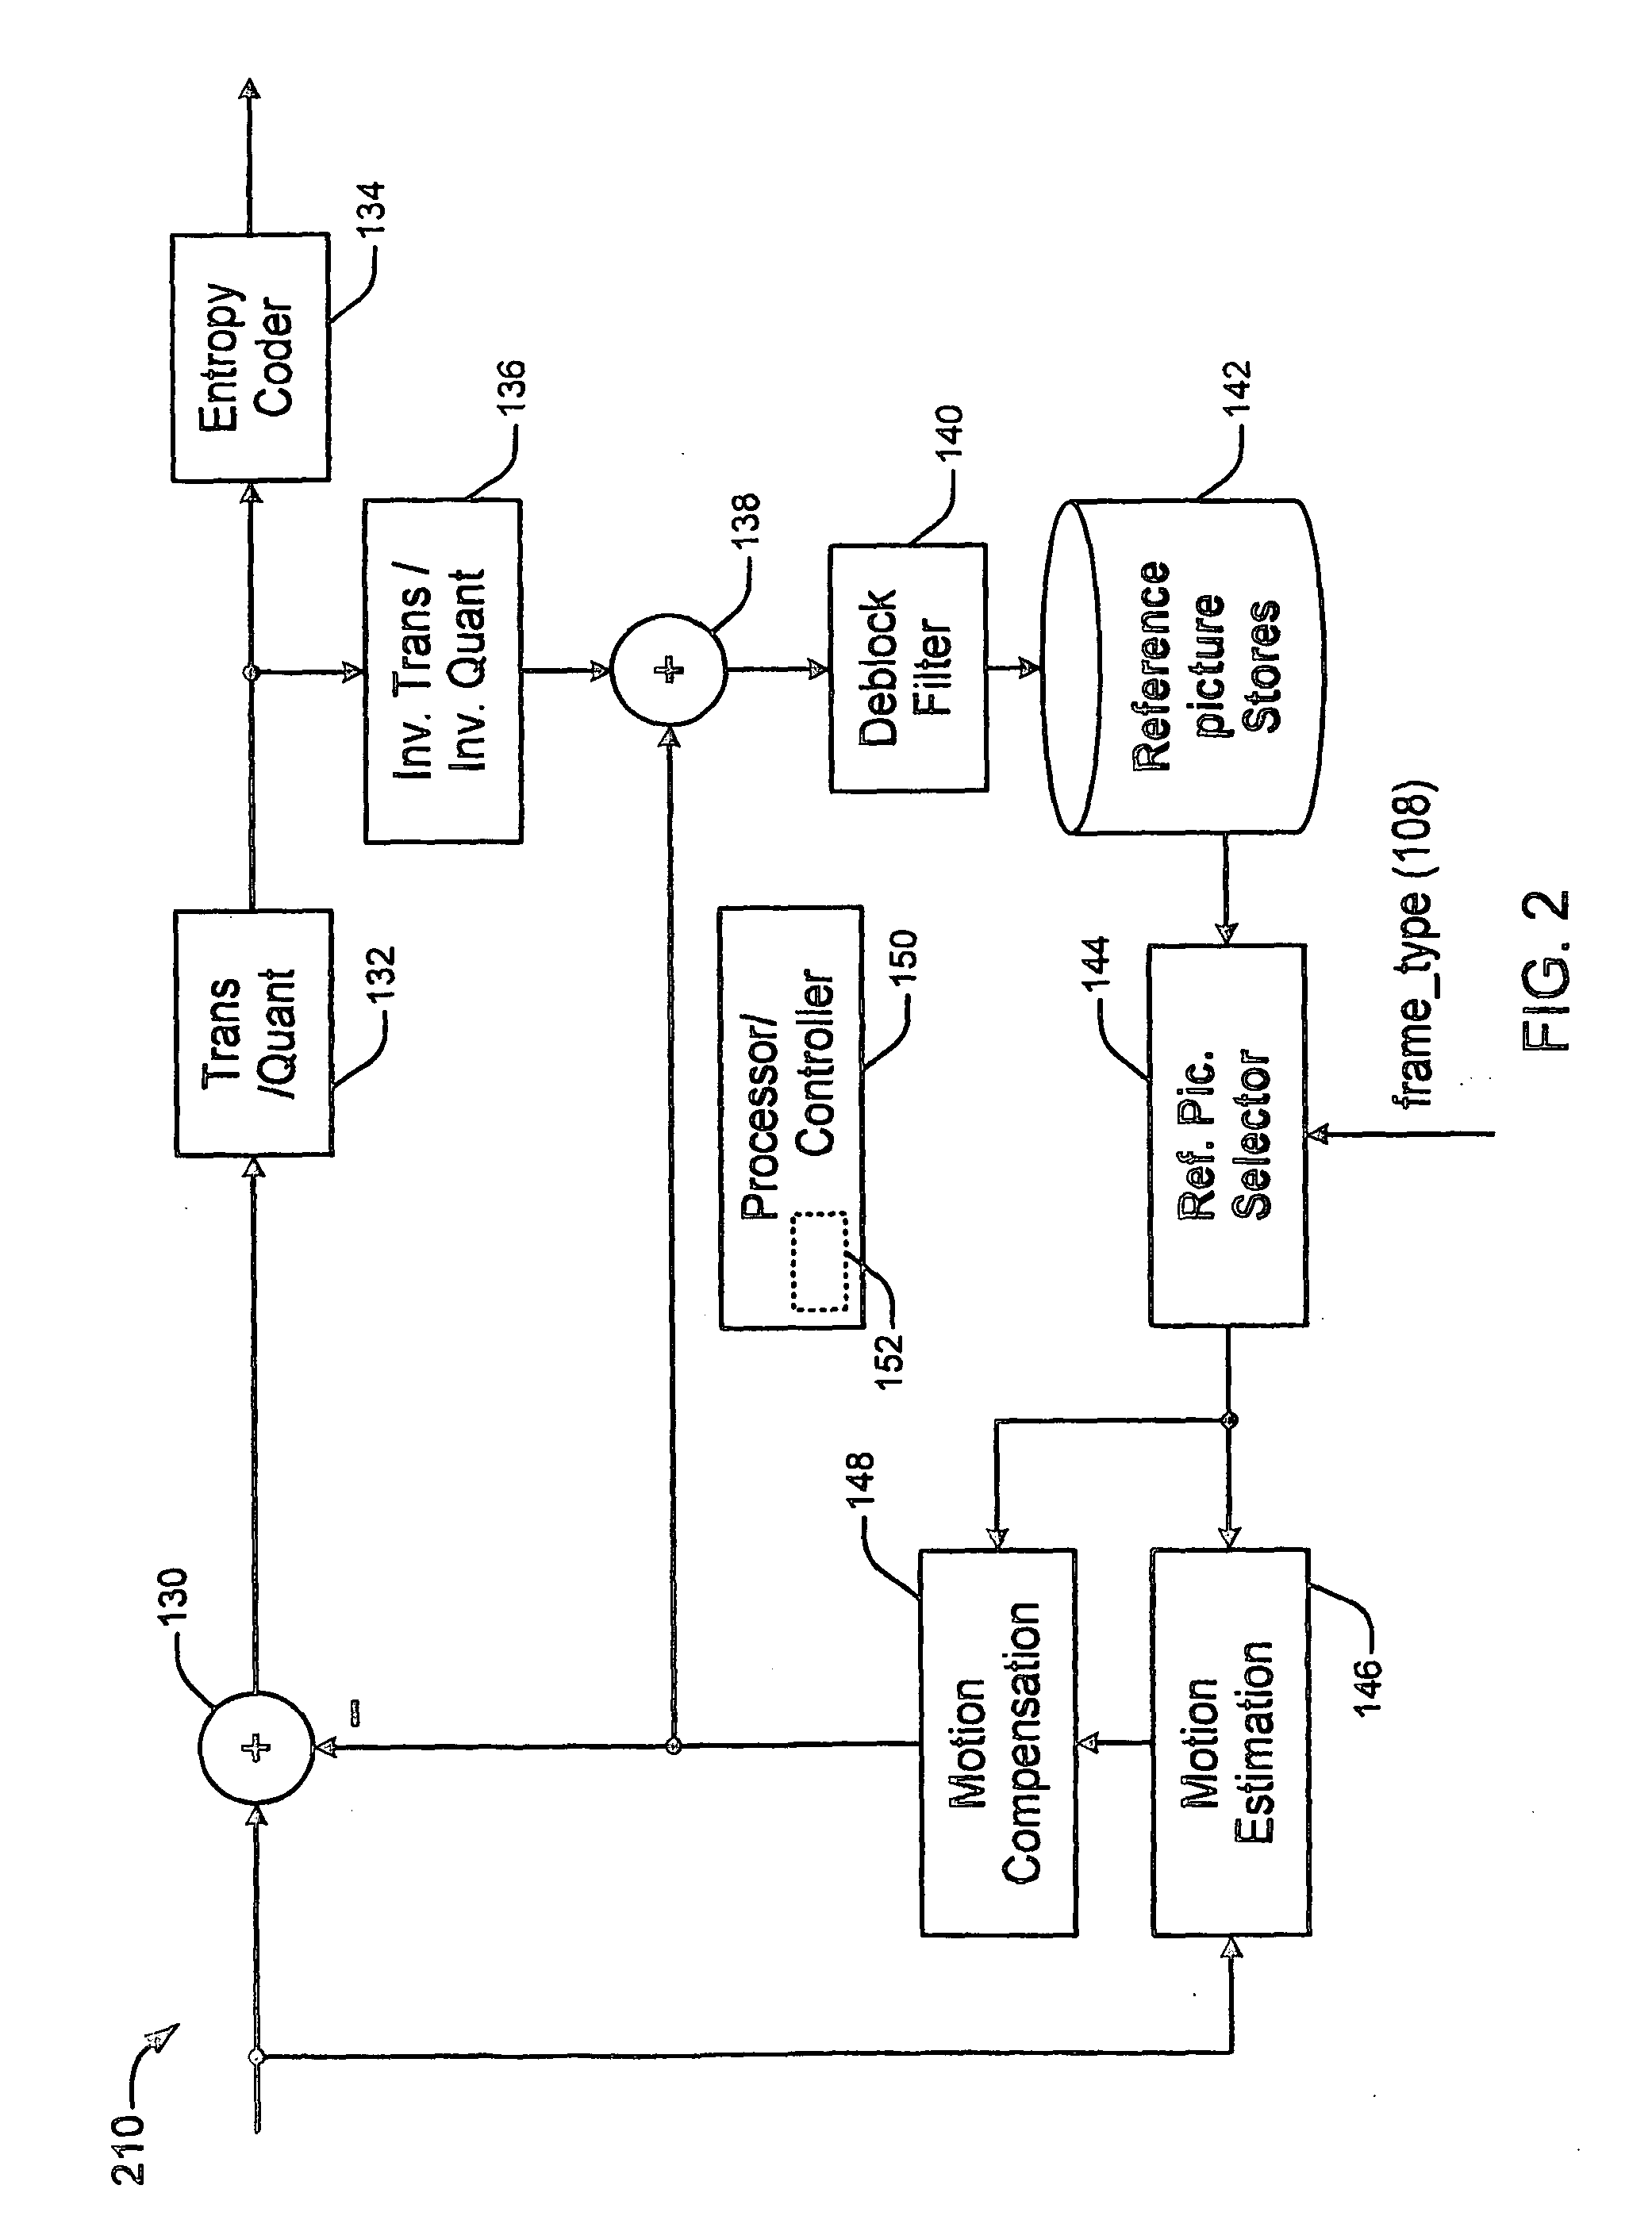 Method and apparatus for bi-directional prediction within p-slices